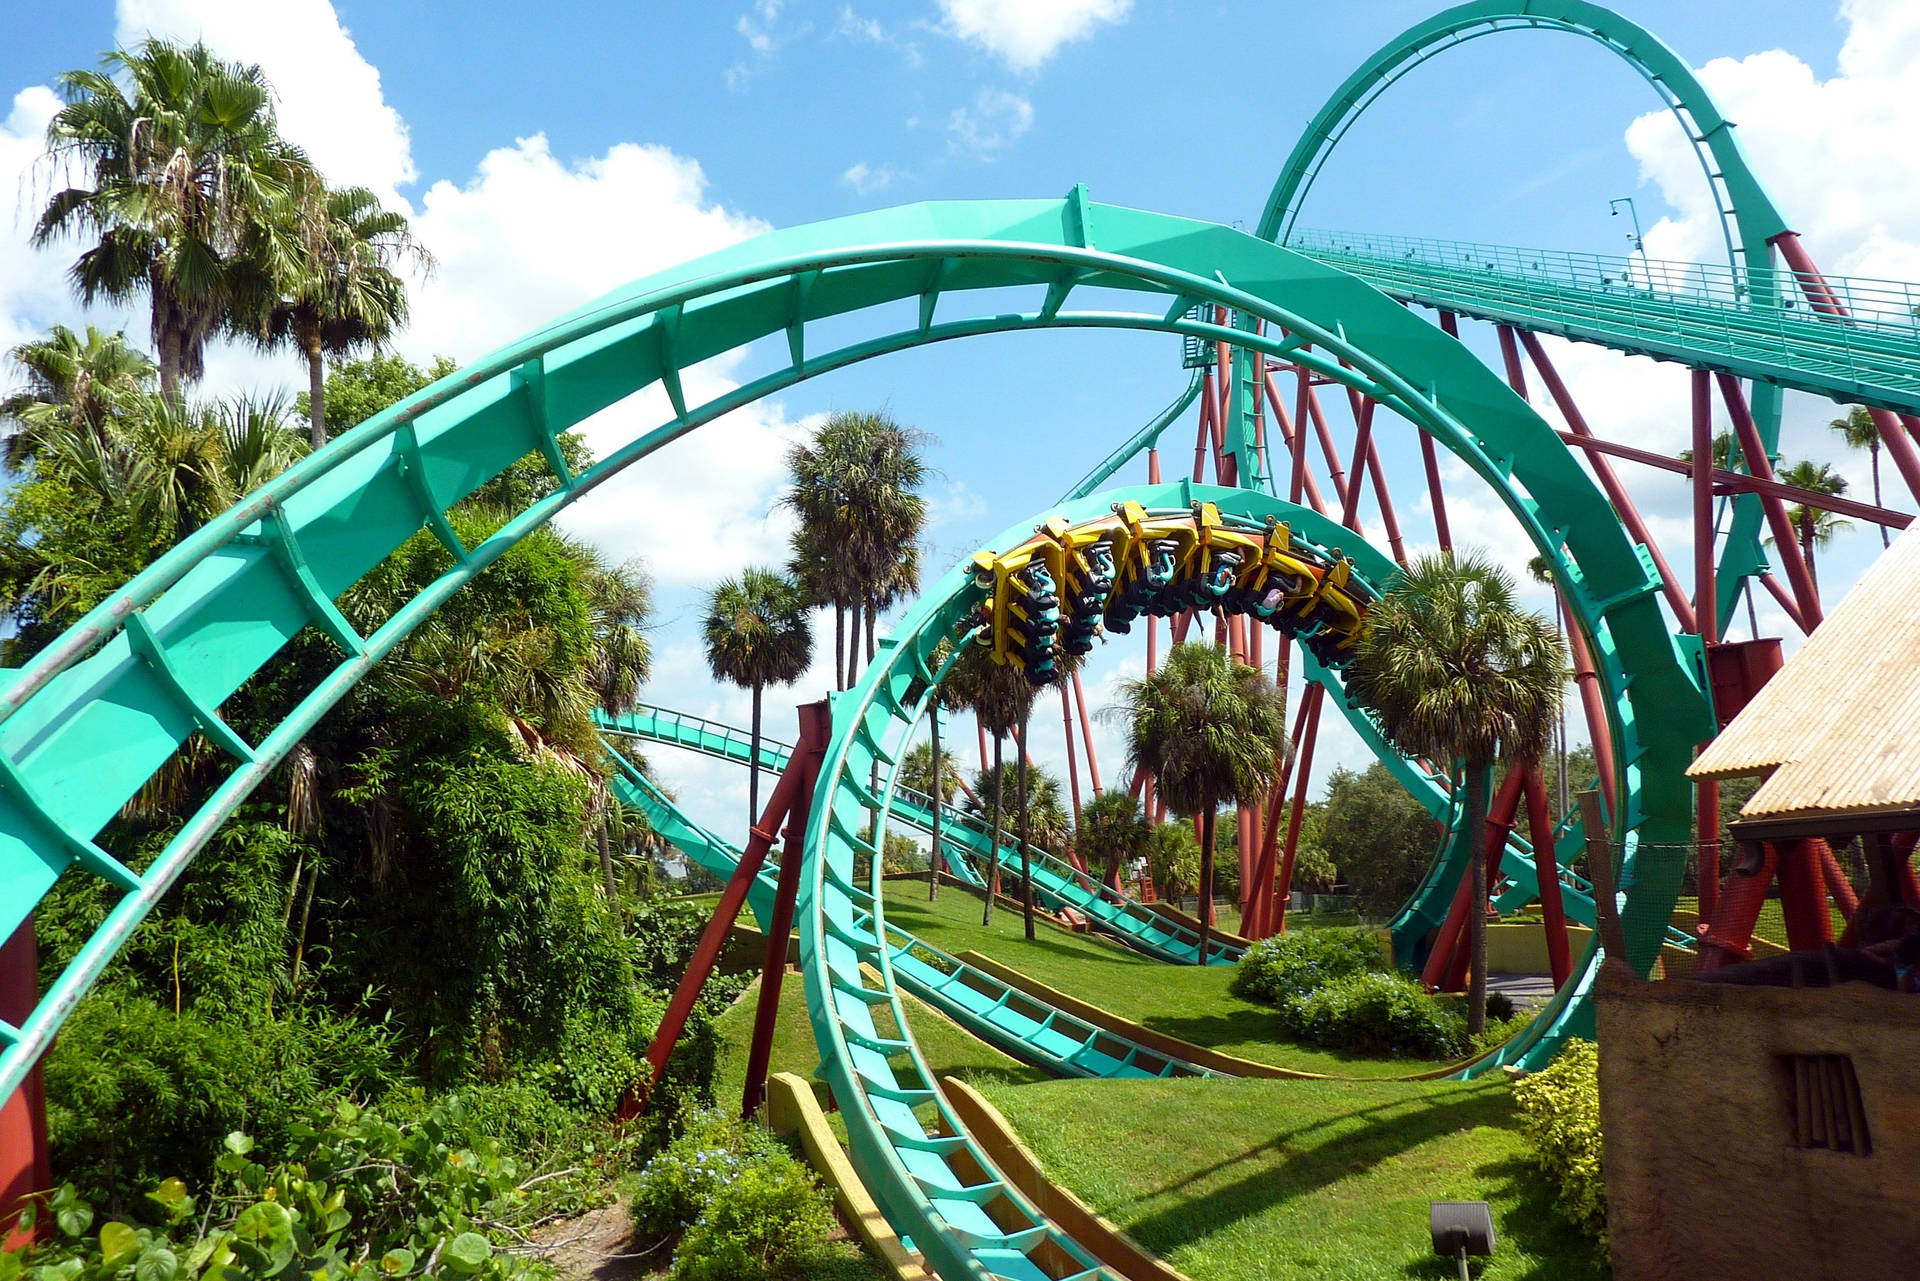 Exciting Ride On A Teal-colored Roller Coaster